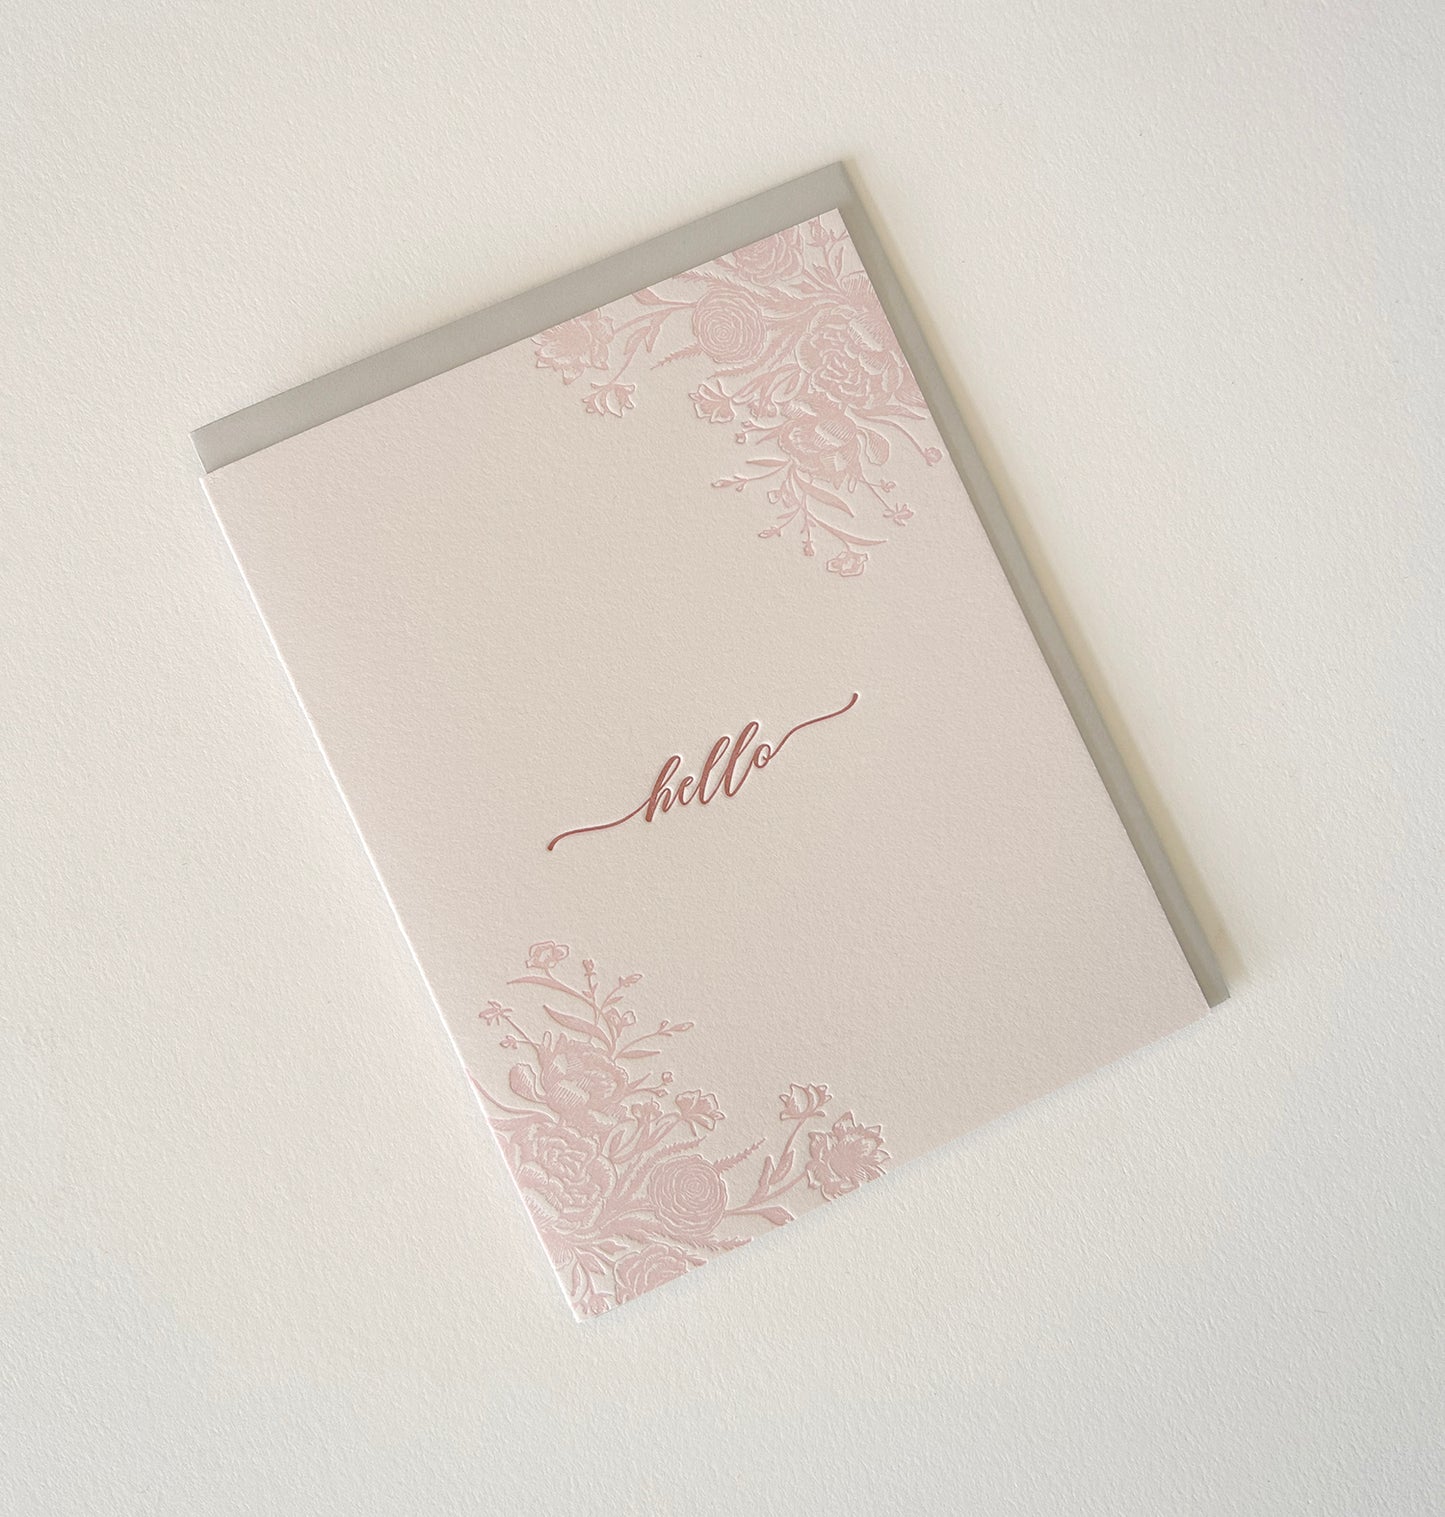 Letterpress friendship card with florals that says "Hello" by Rust Belt Love